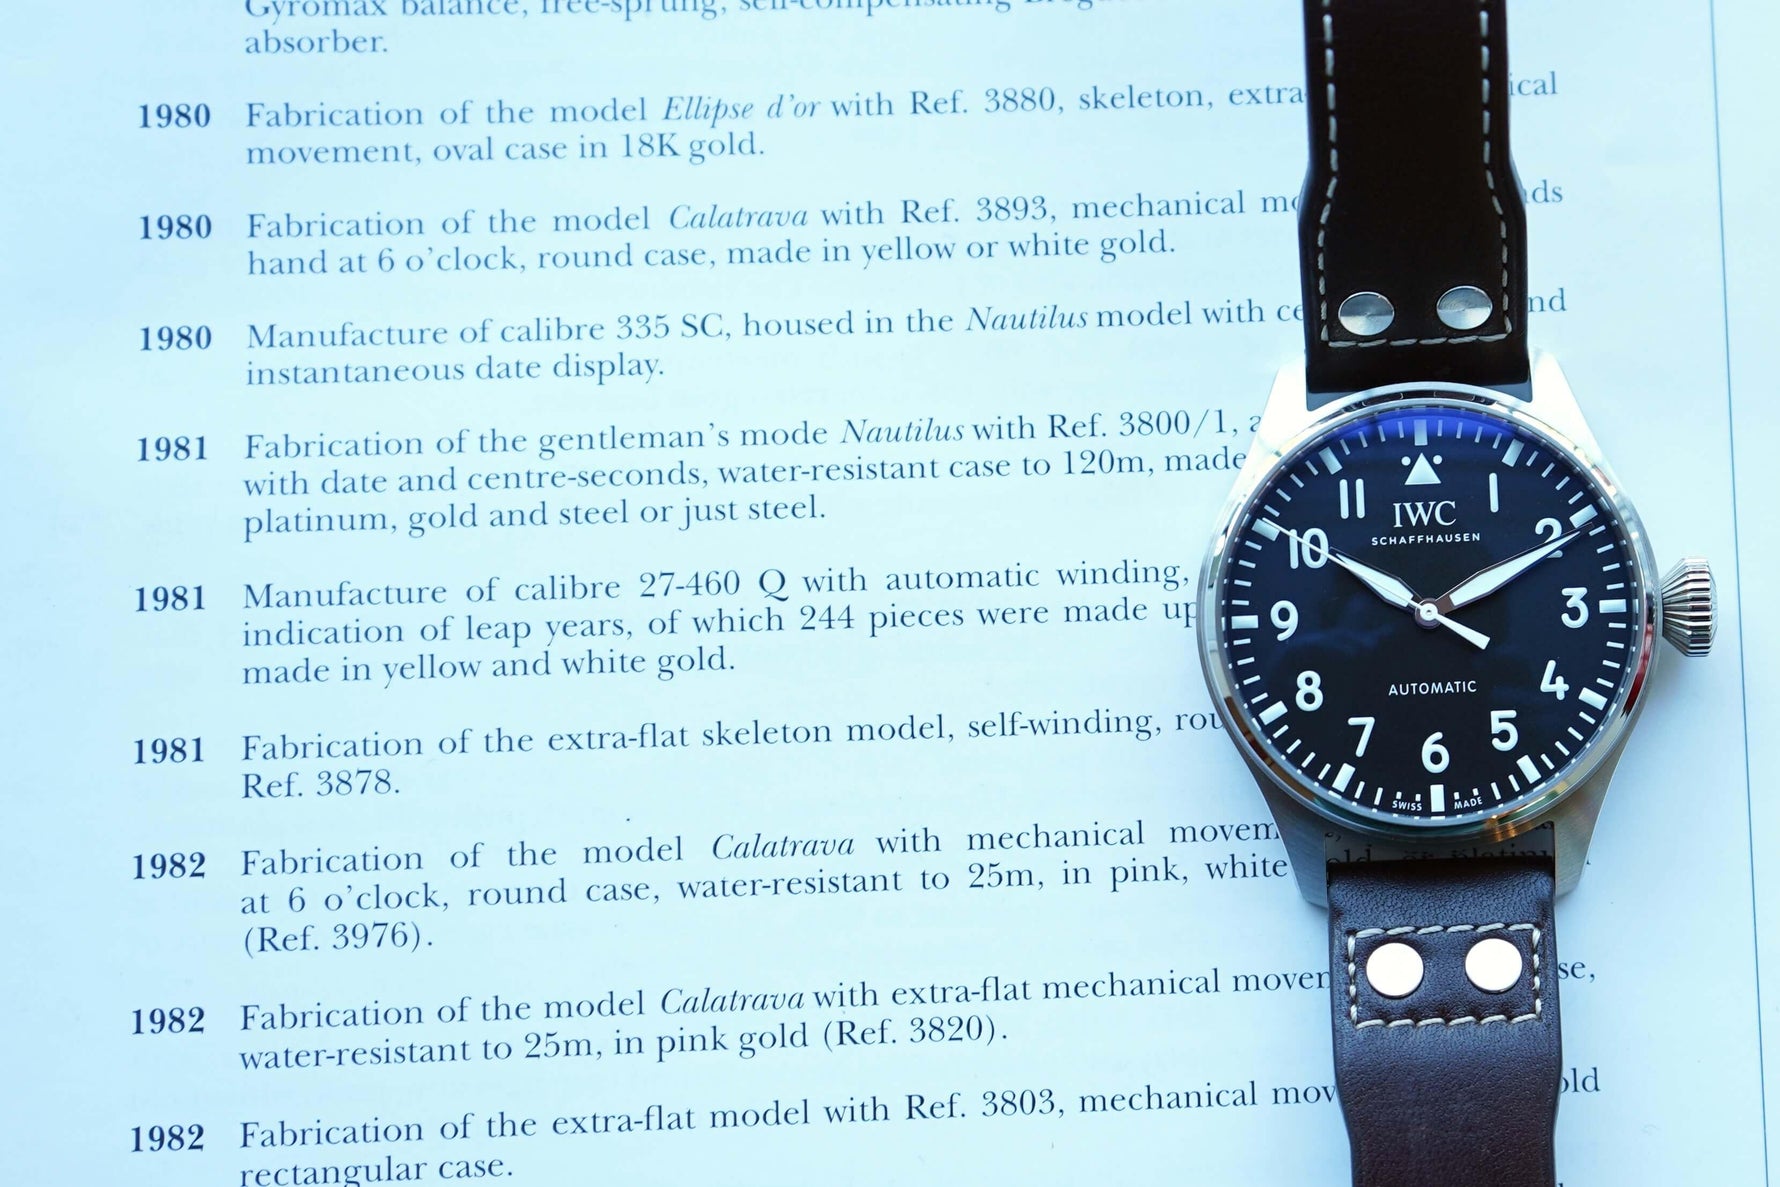 SOLD OUT: IWC Big Pilots Watch 43MM IW329301 2021 Paperwork and Box - WearingTime Luxury Watches